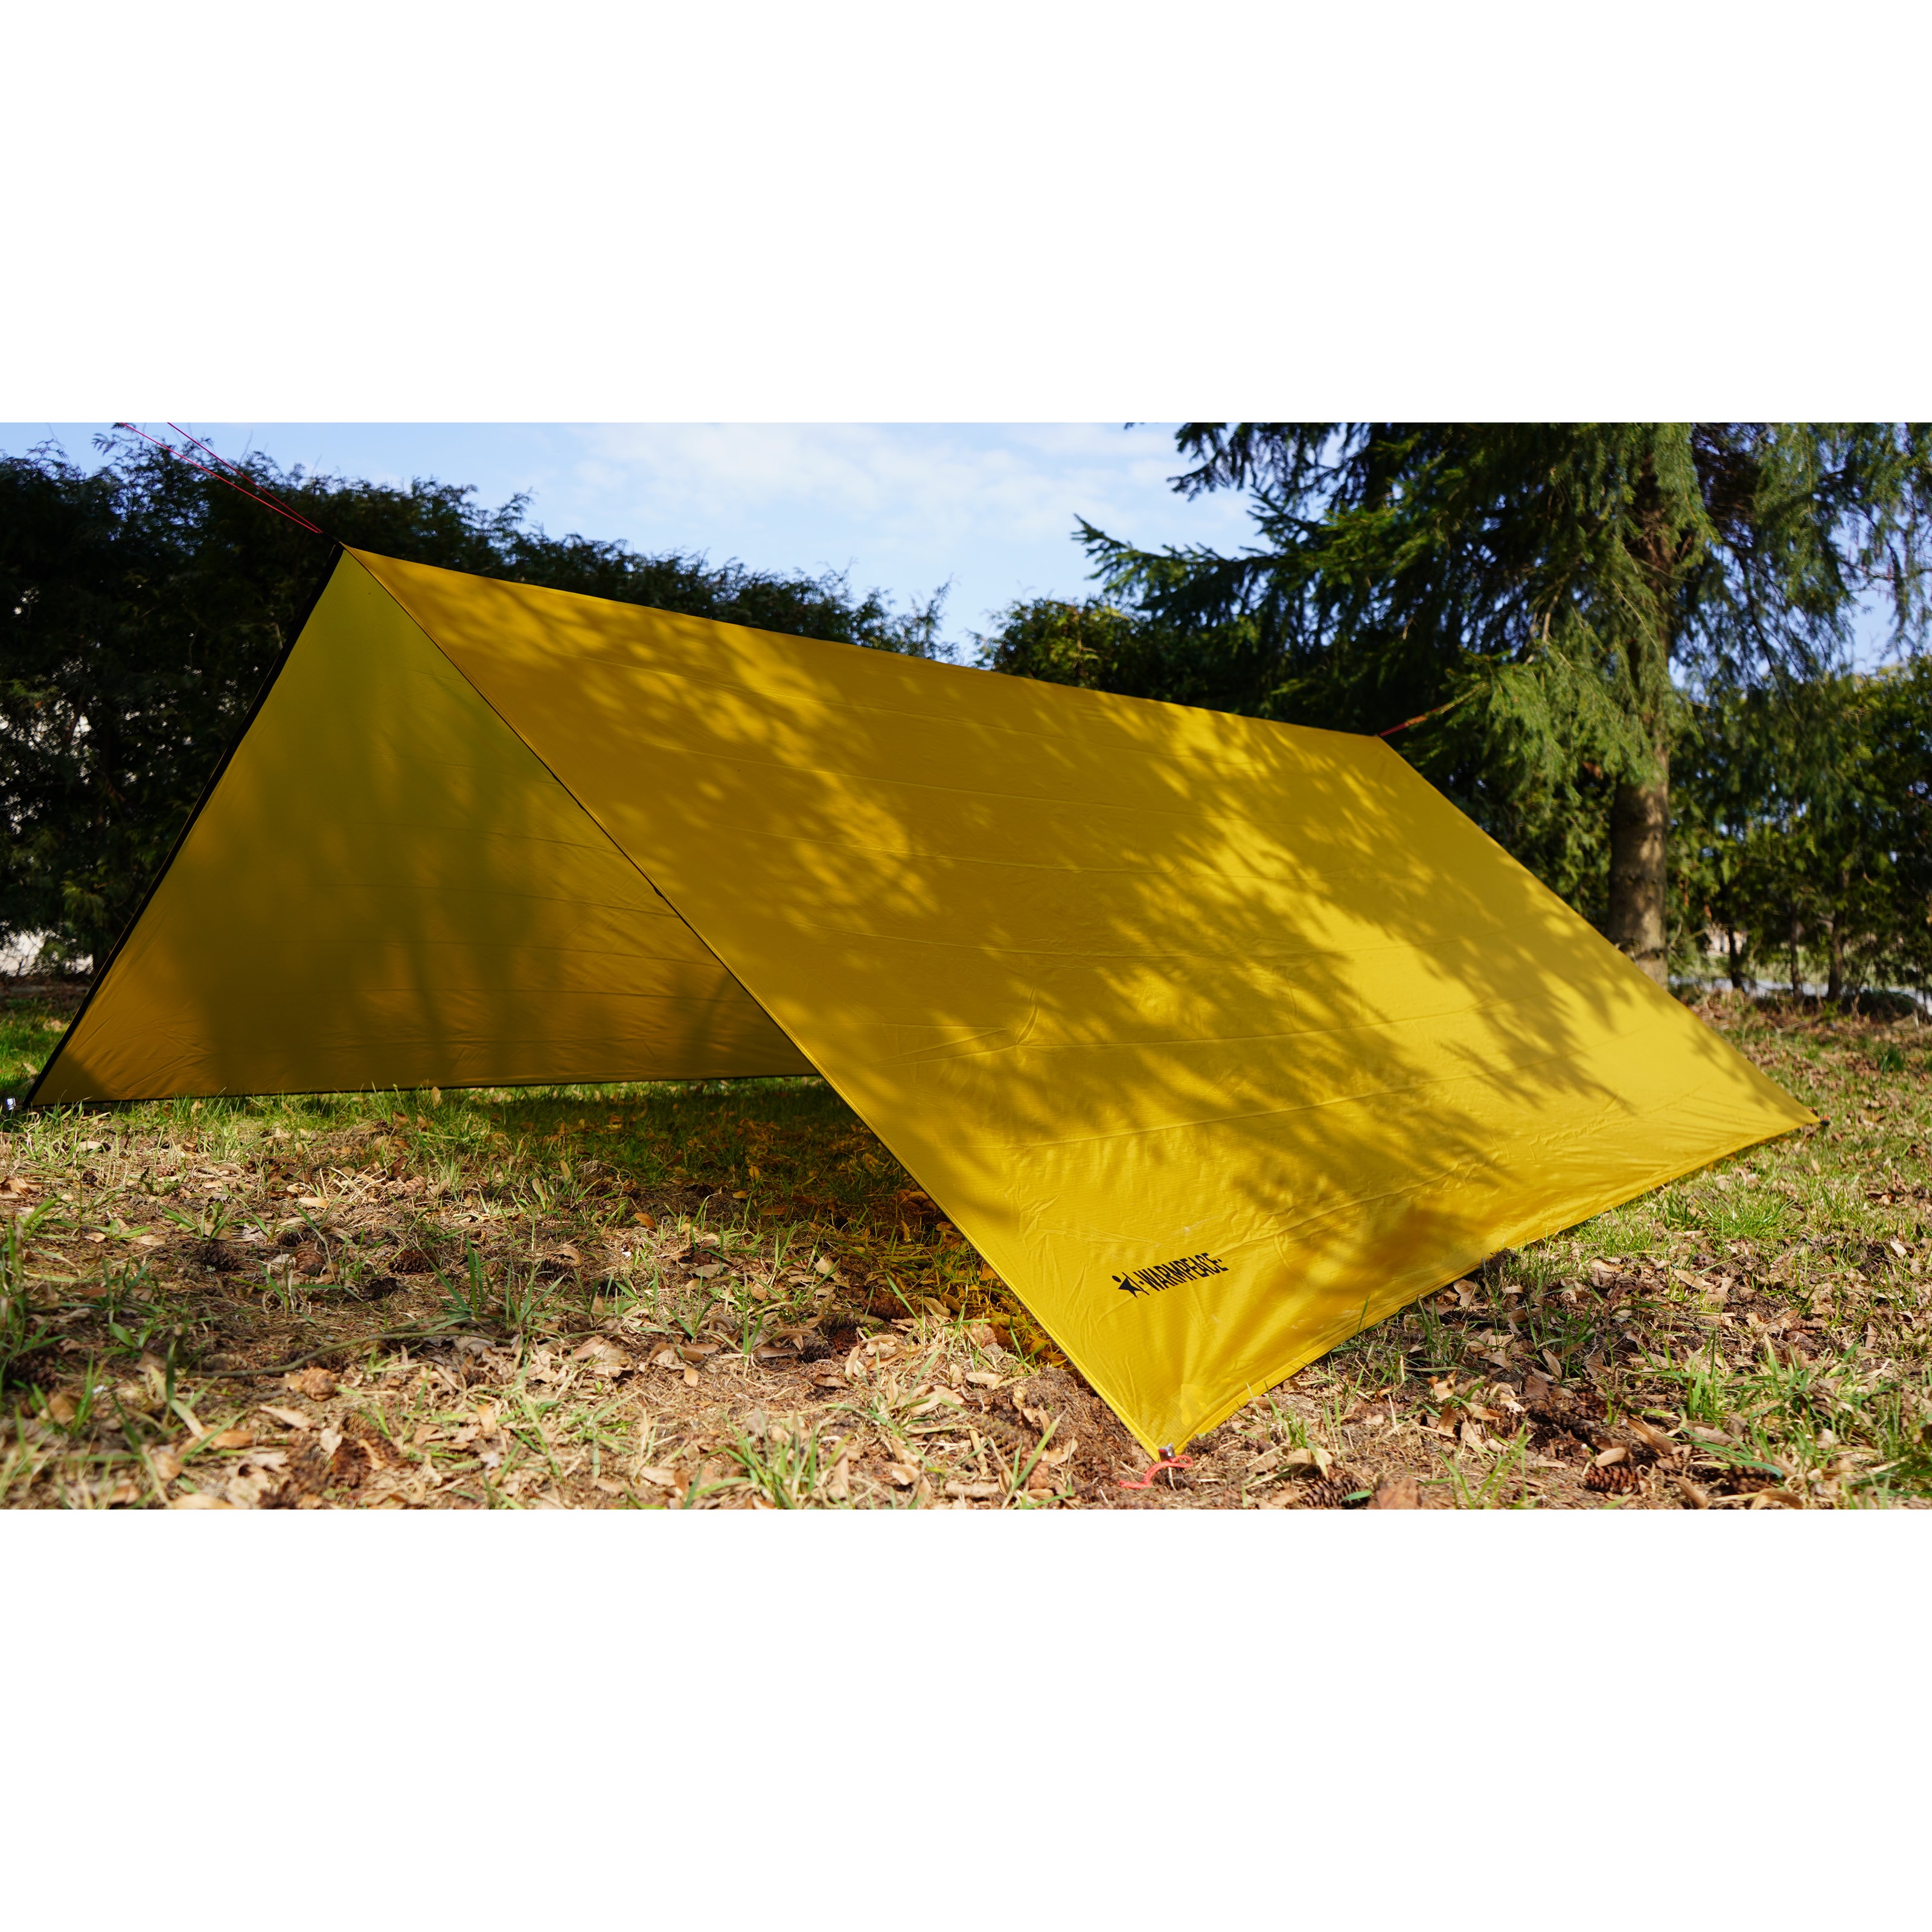 PLACHTA SHELTER nugget gold  614112 L-11